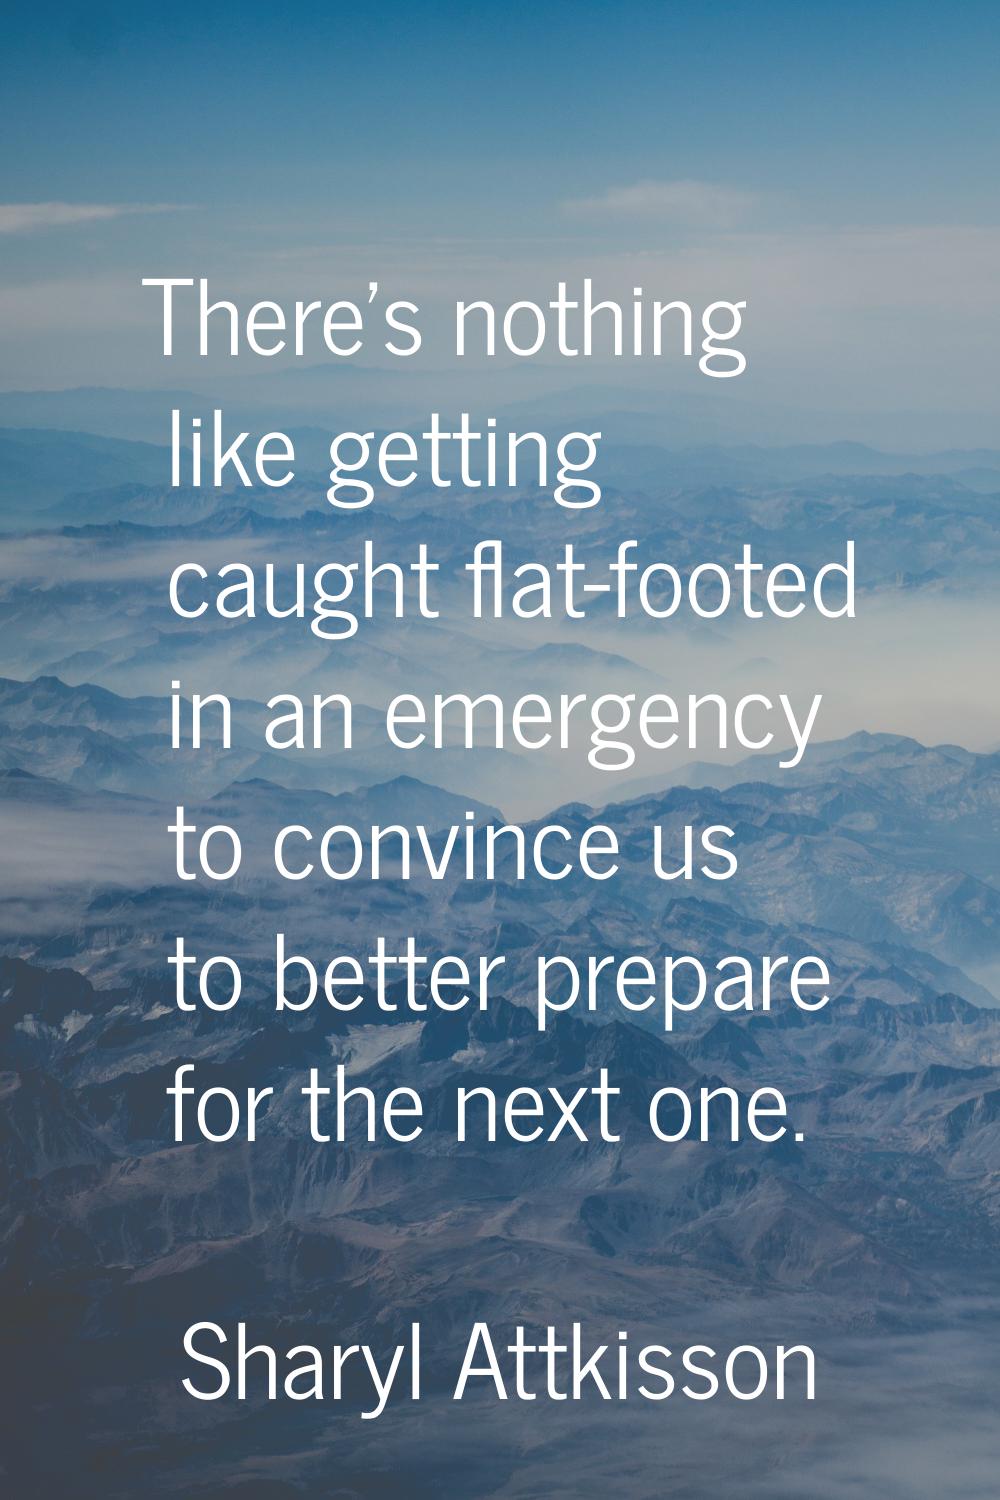 There's nothing like getting caught flat-footed in an emergency to convince us to better prepare fo